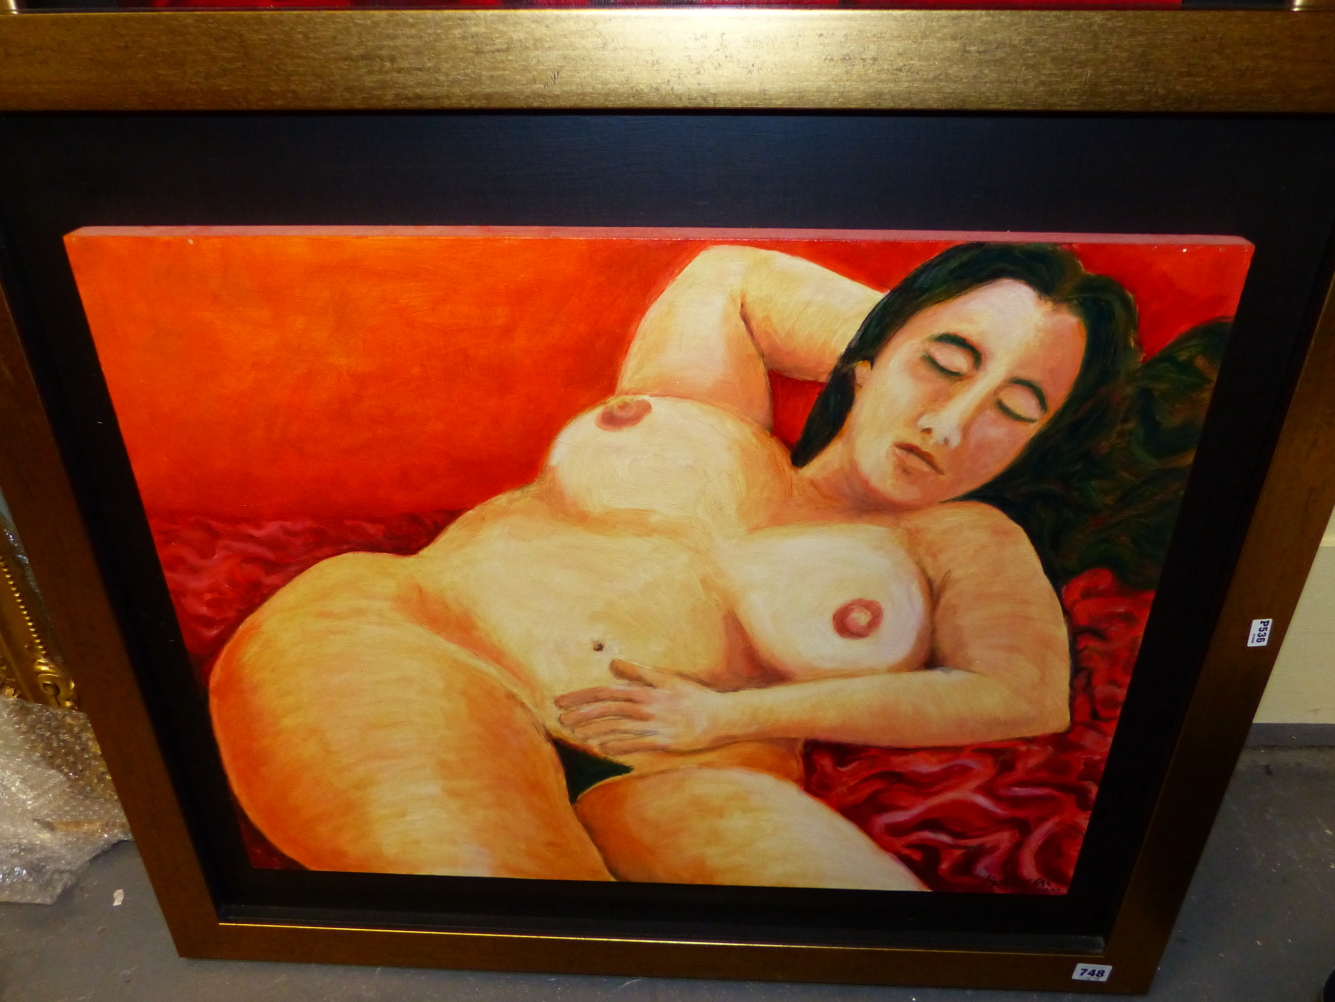 ISAACSON. 20th/21st.C. ARR. RECLINING NUDE, SIGNED AND DATED 2000, OIL ON BOARD. 55 x 71cms. - Image 9 of 12